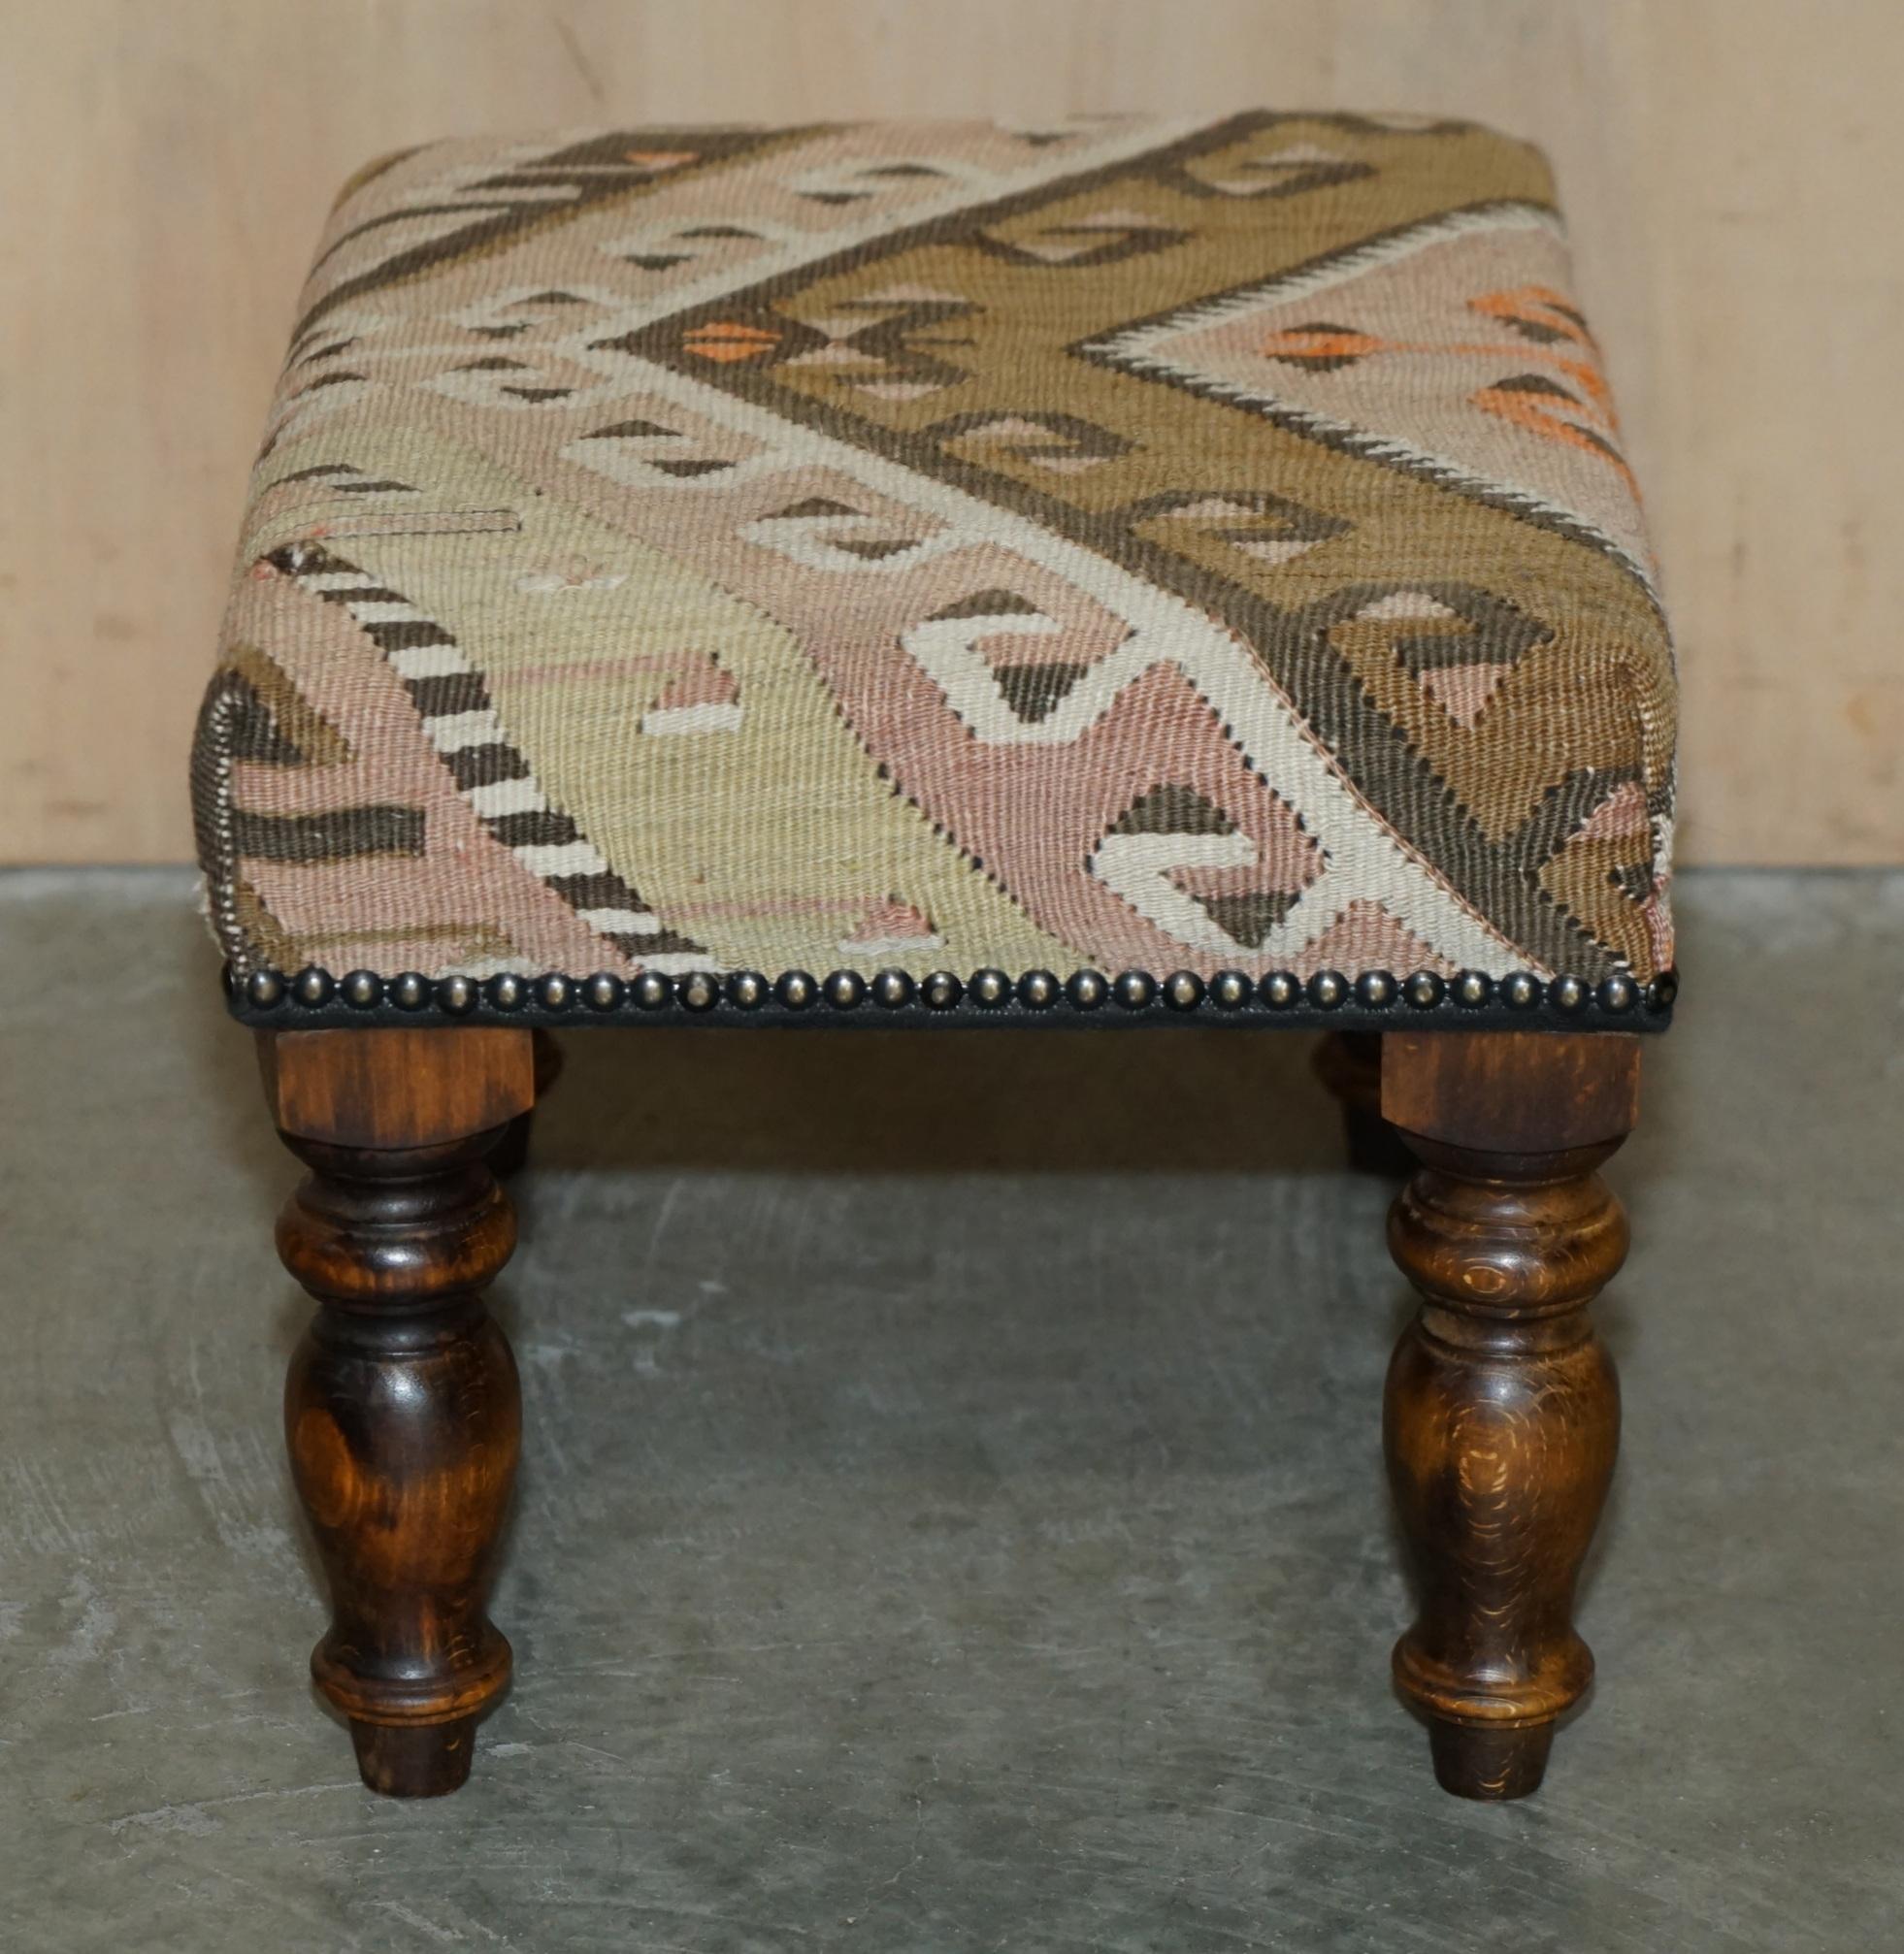 Tissu d'ameublement STUNNiNG & COLLECTABLE GEORGE SMITH CHELSEA KILIM FOOTSTOOL OTTOMAN en vente